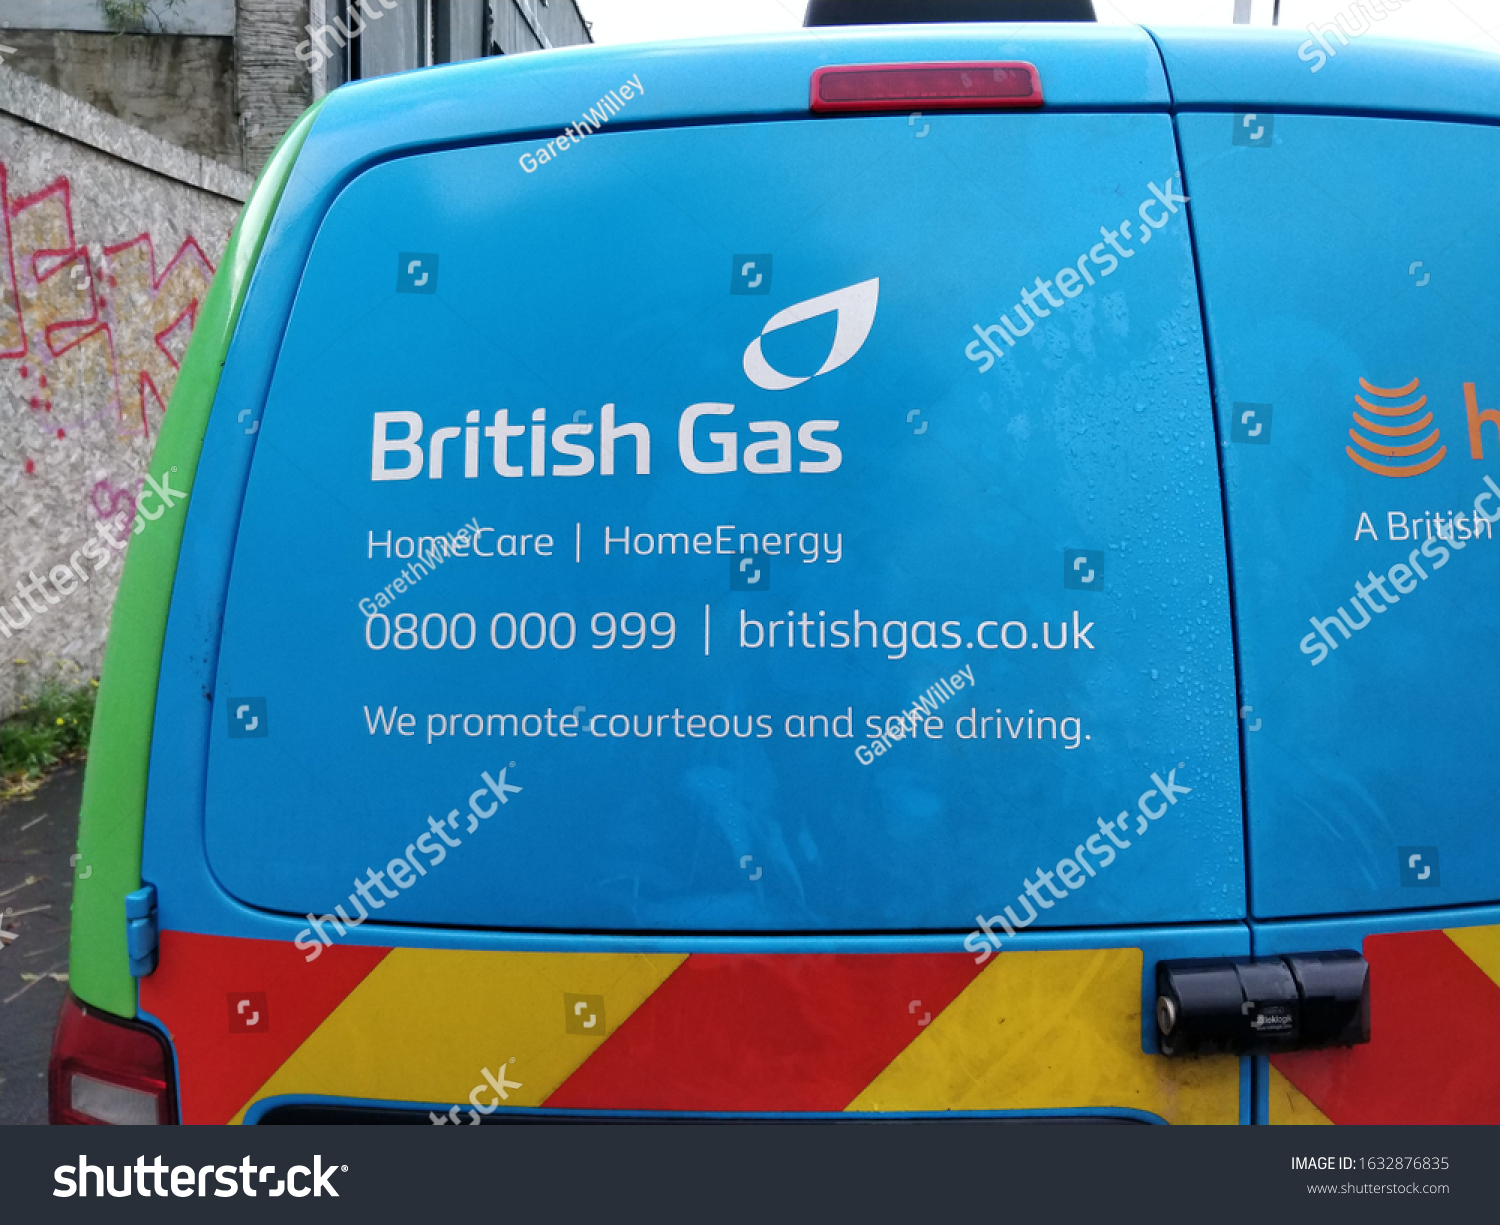 British gas stock geometric shapes of forex